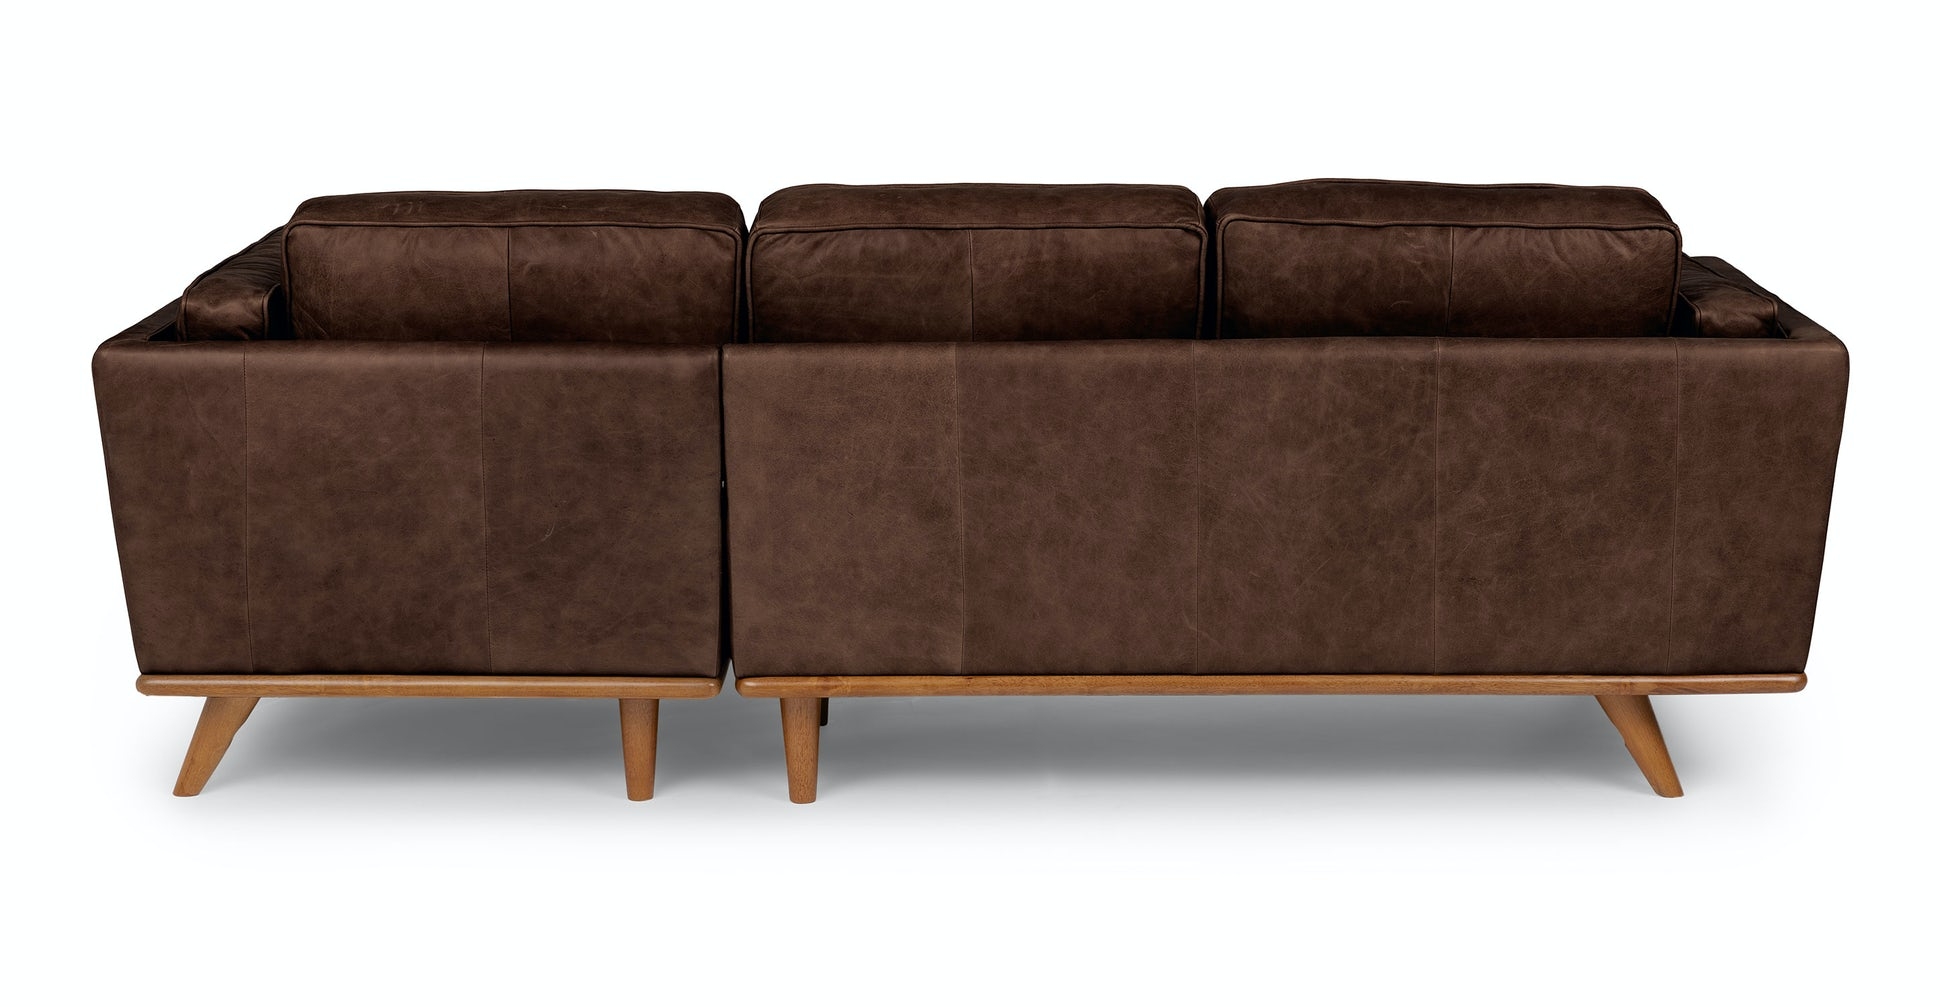 Timber Charme Chocolat Right Sectional - Image 3